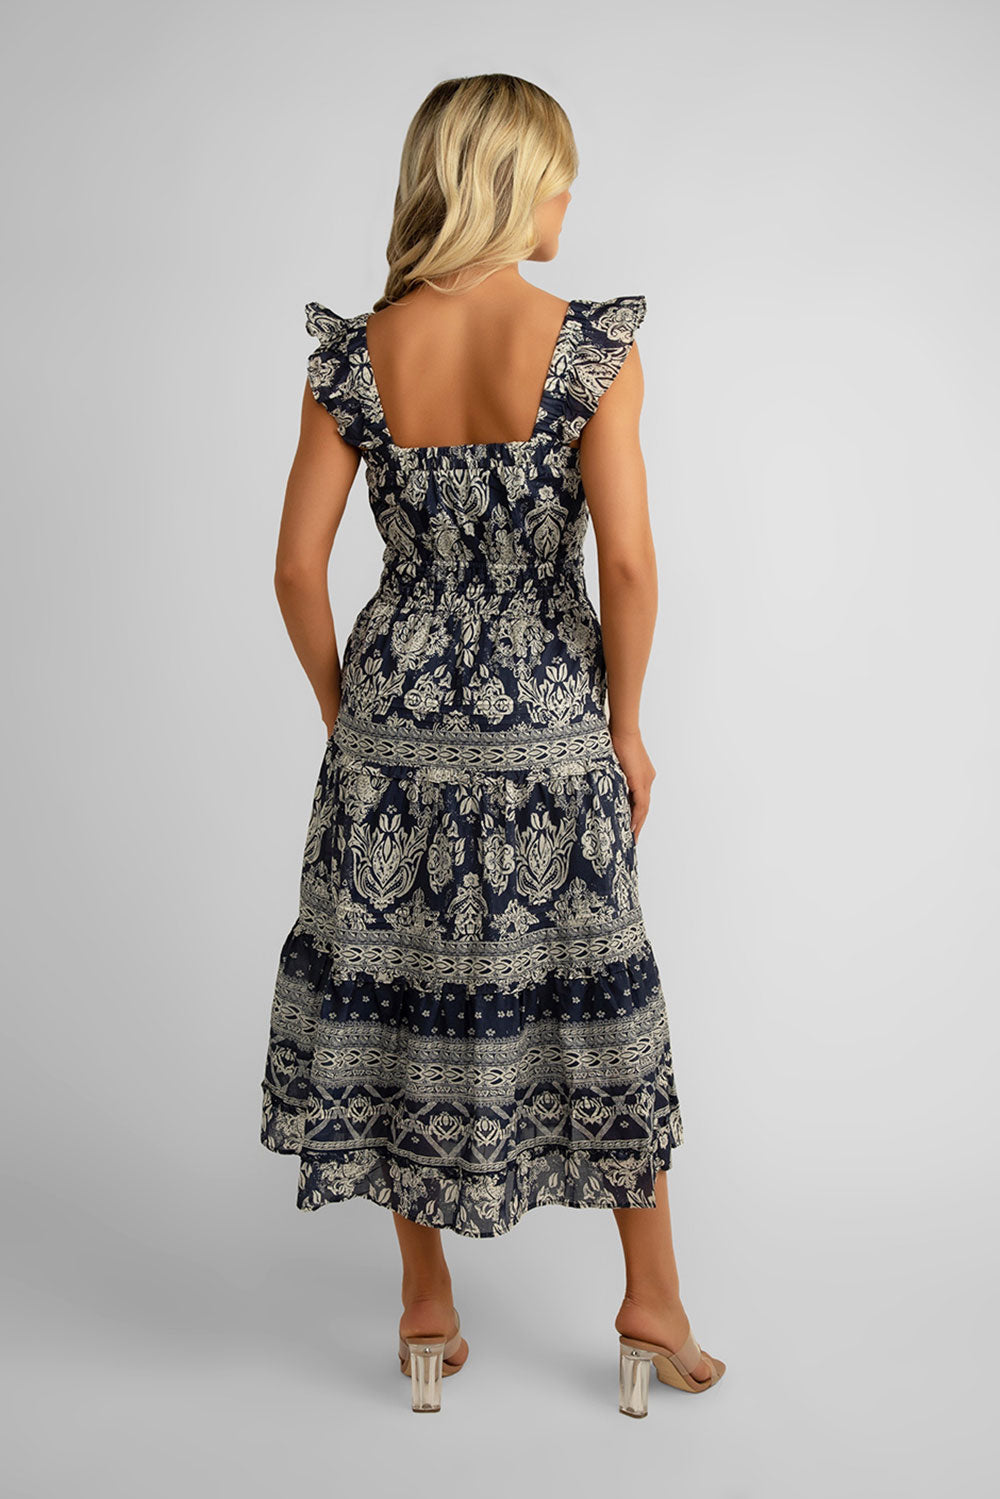 MELISSA NEPTON - Printed Maxi Dress - Women's Clothing & Accessories 